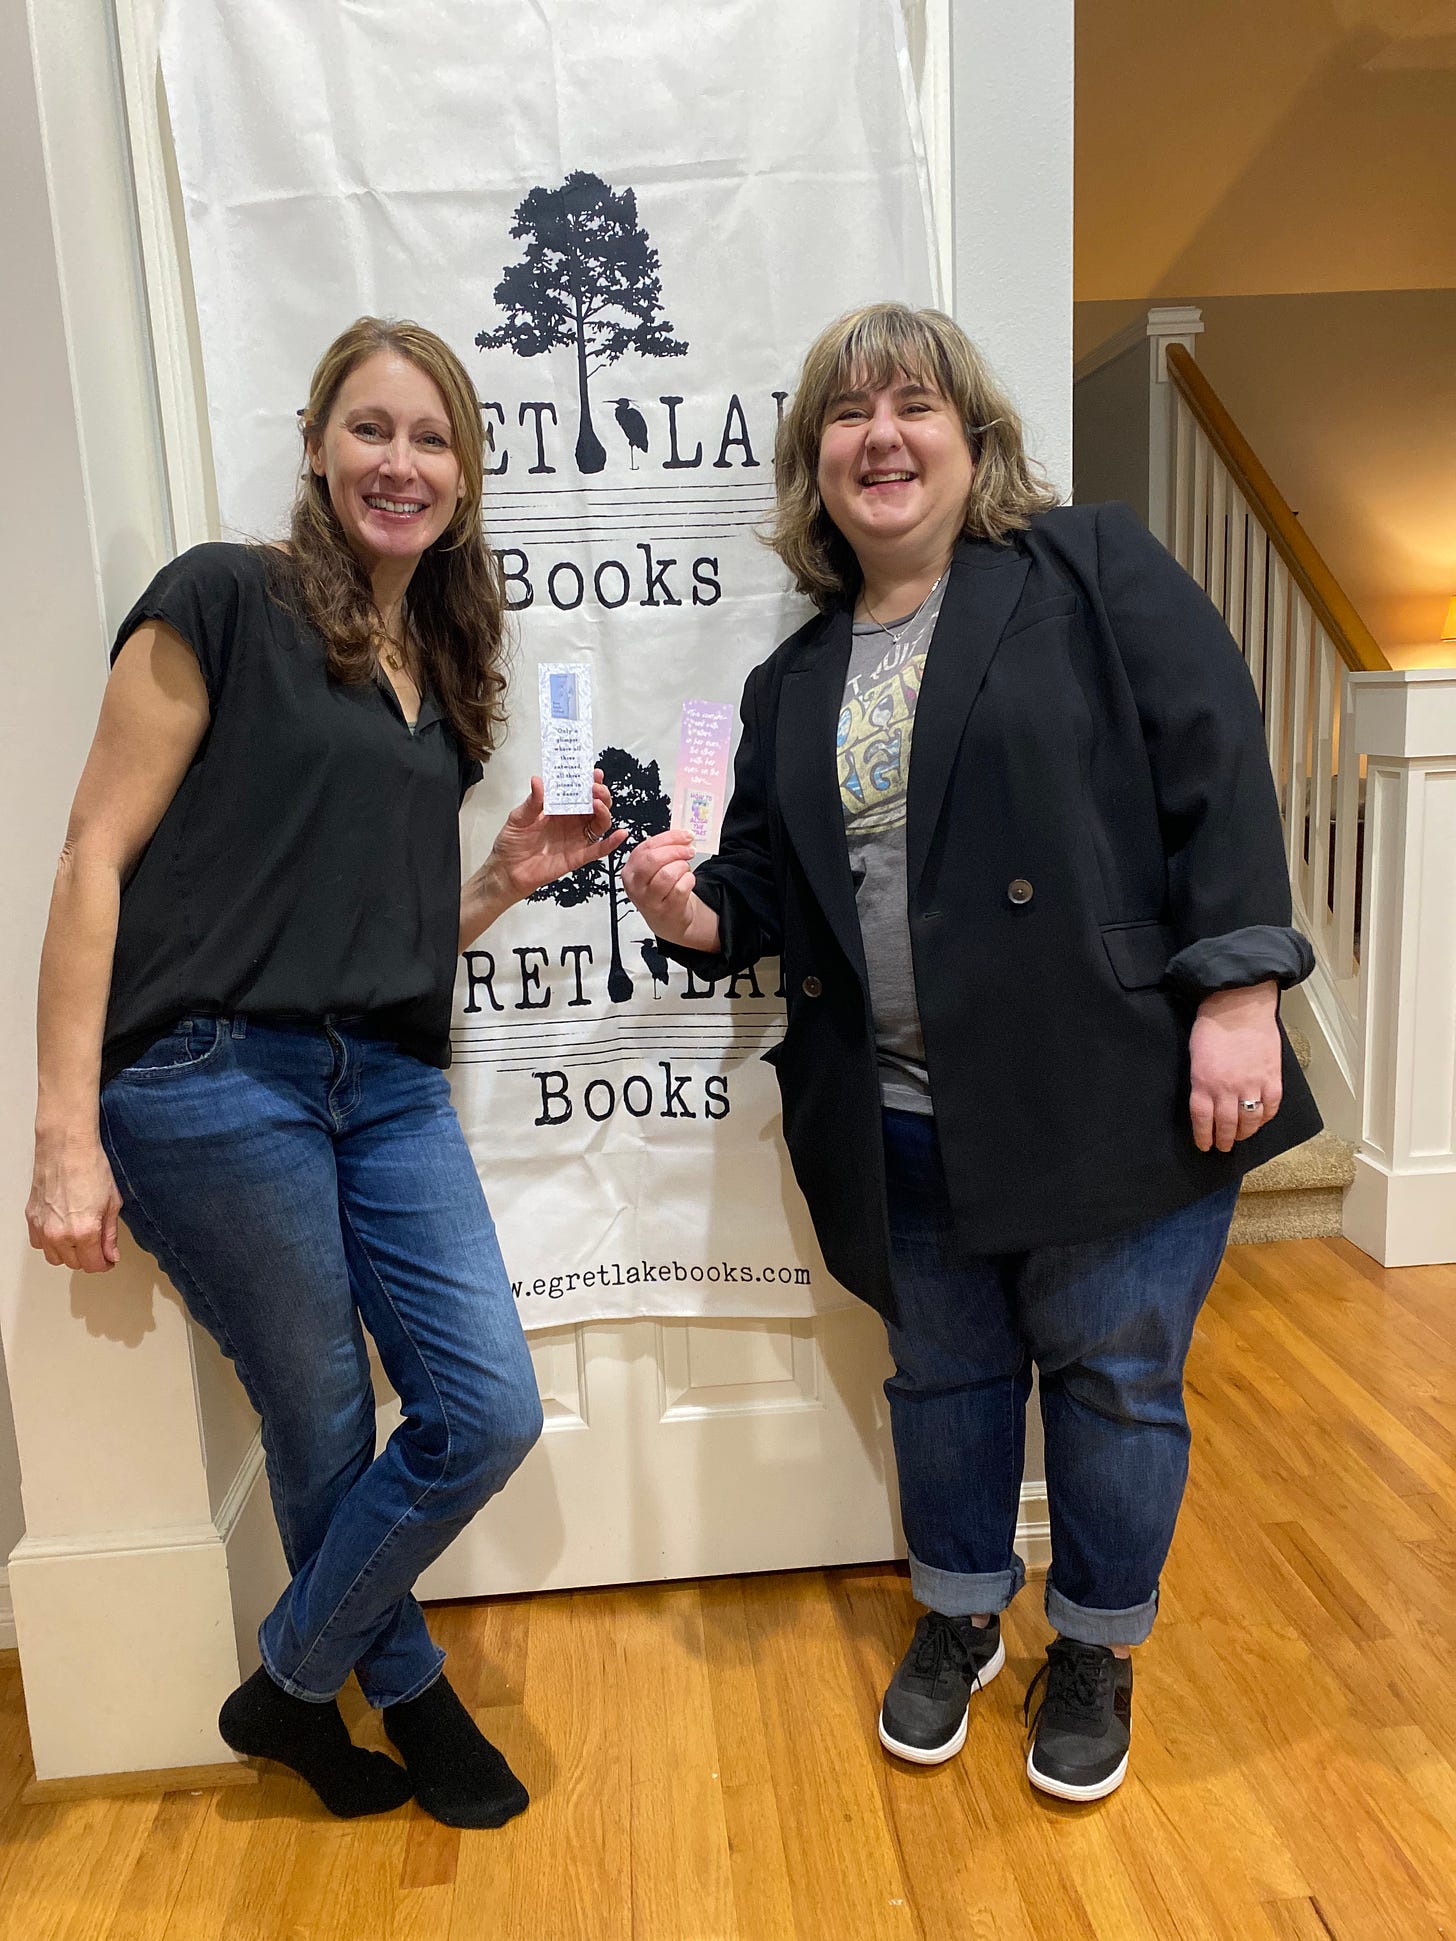 Celaine (left) and Amy (right) stand in front of the Egret Lake Books banner, holding up bookmarks for each of their books. They are both wearing jeans and black tops.